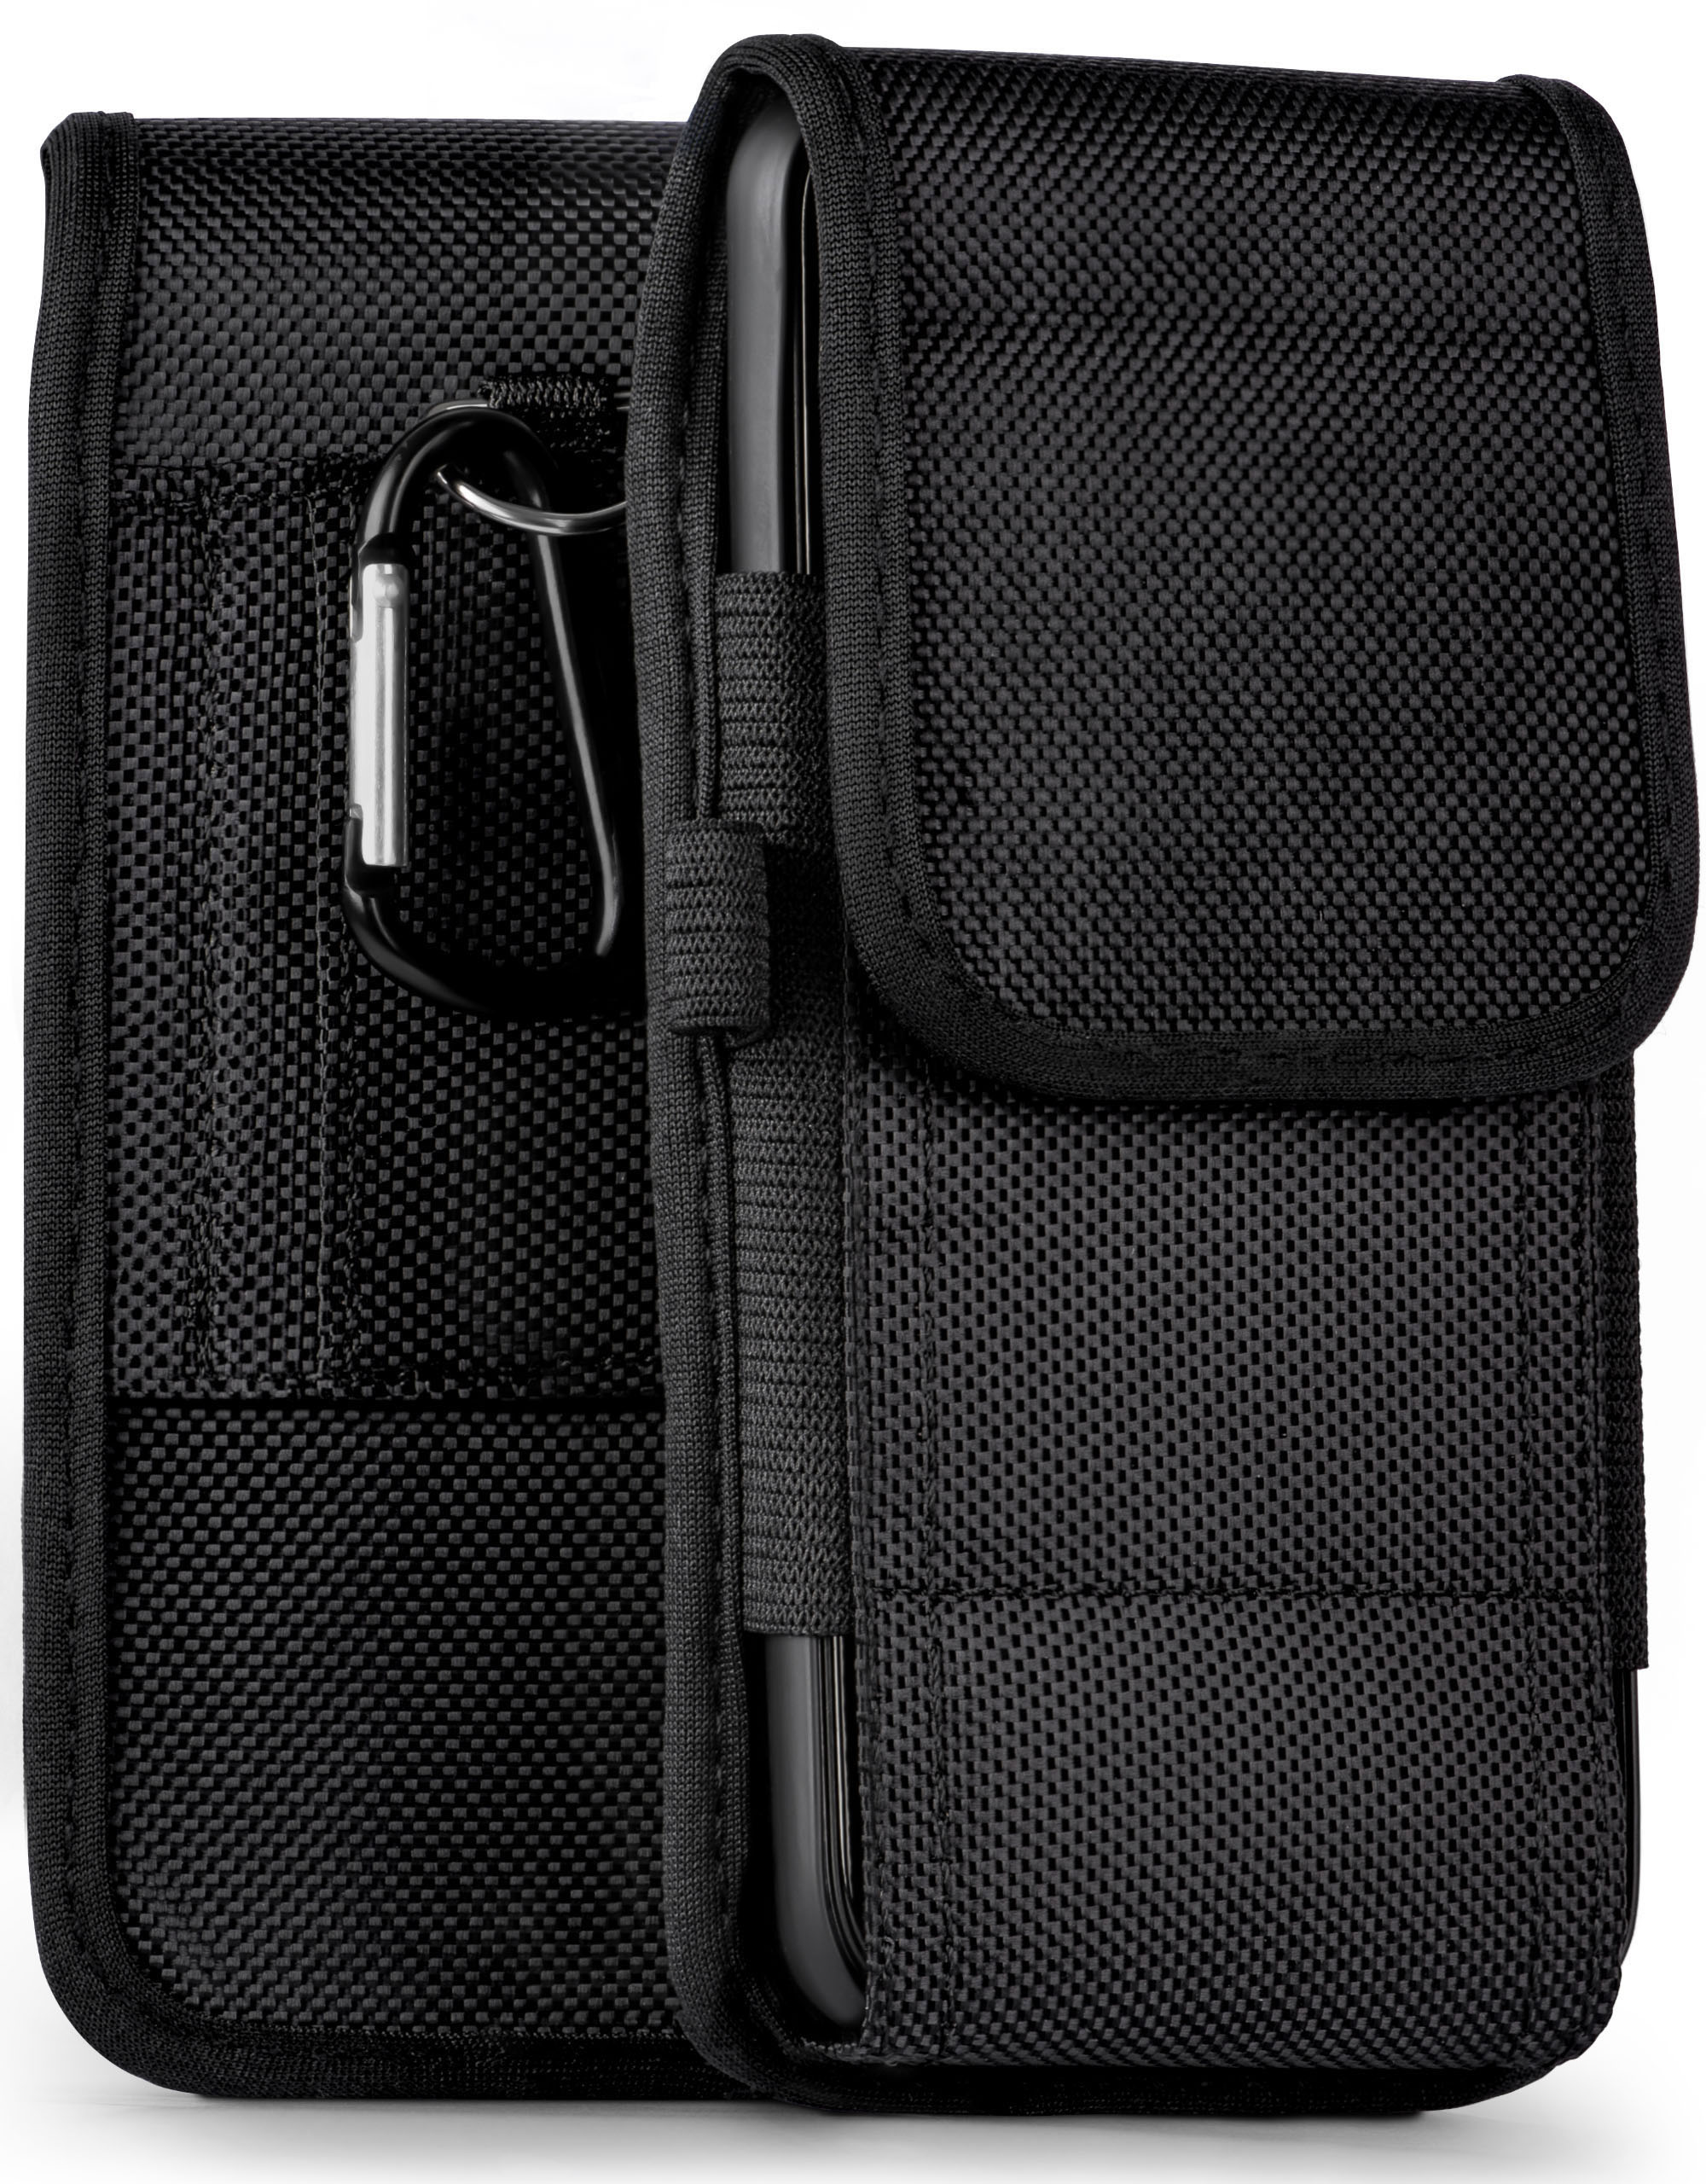 Case, Trail OnePlus, Agility Holster, MOEX 7T,